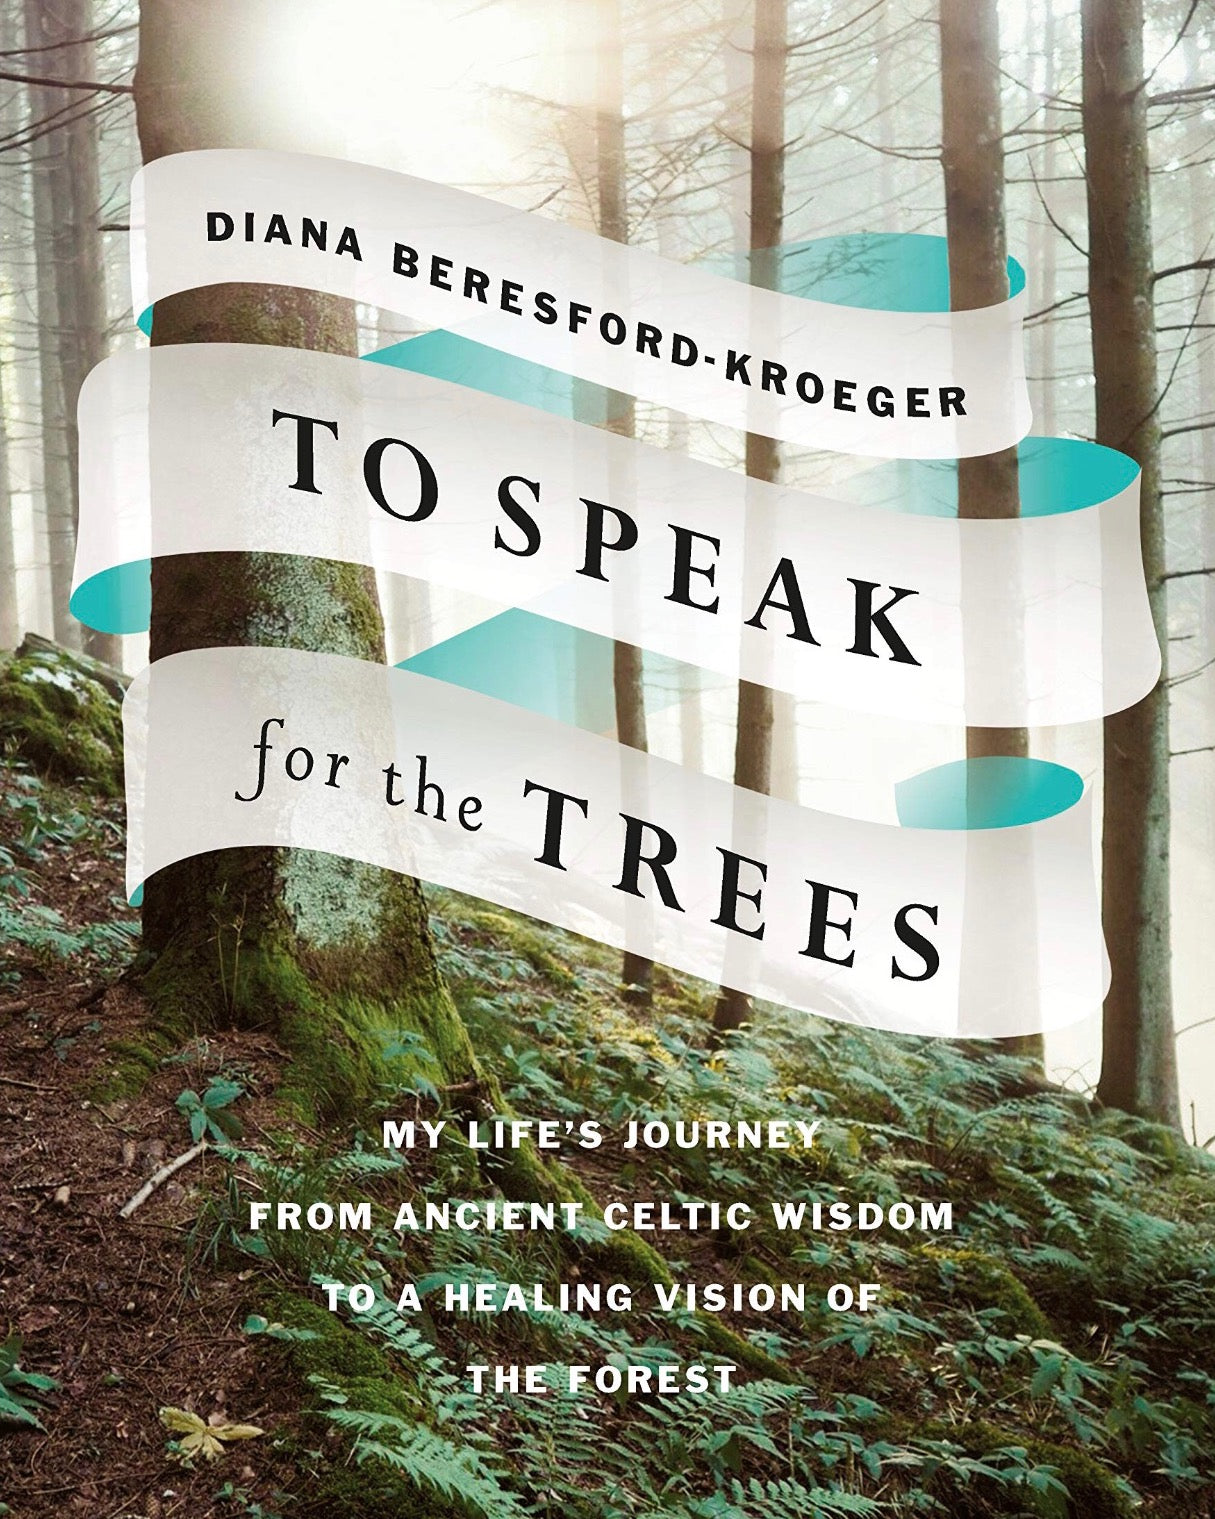 To Speak for the Trees, by Diana Beresford Kroeger